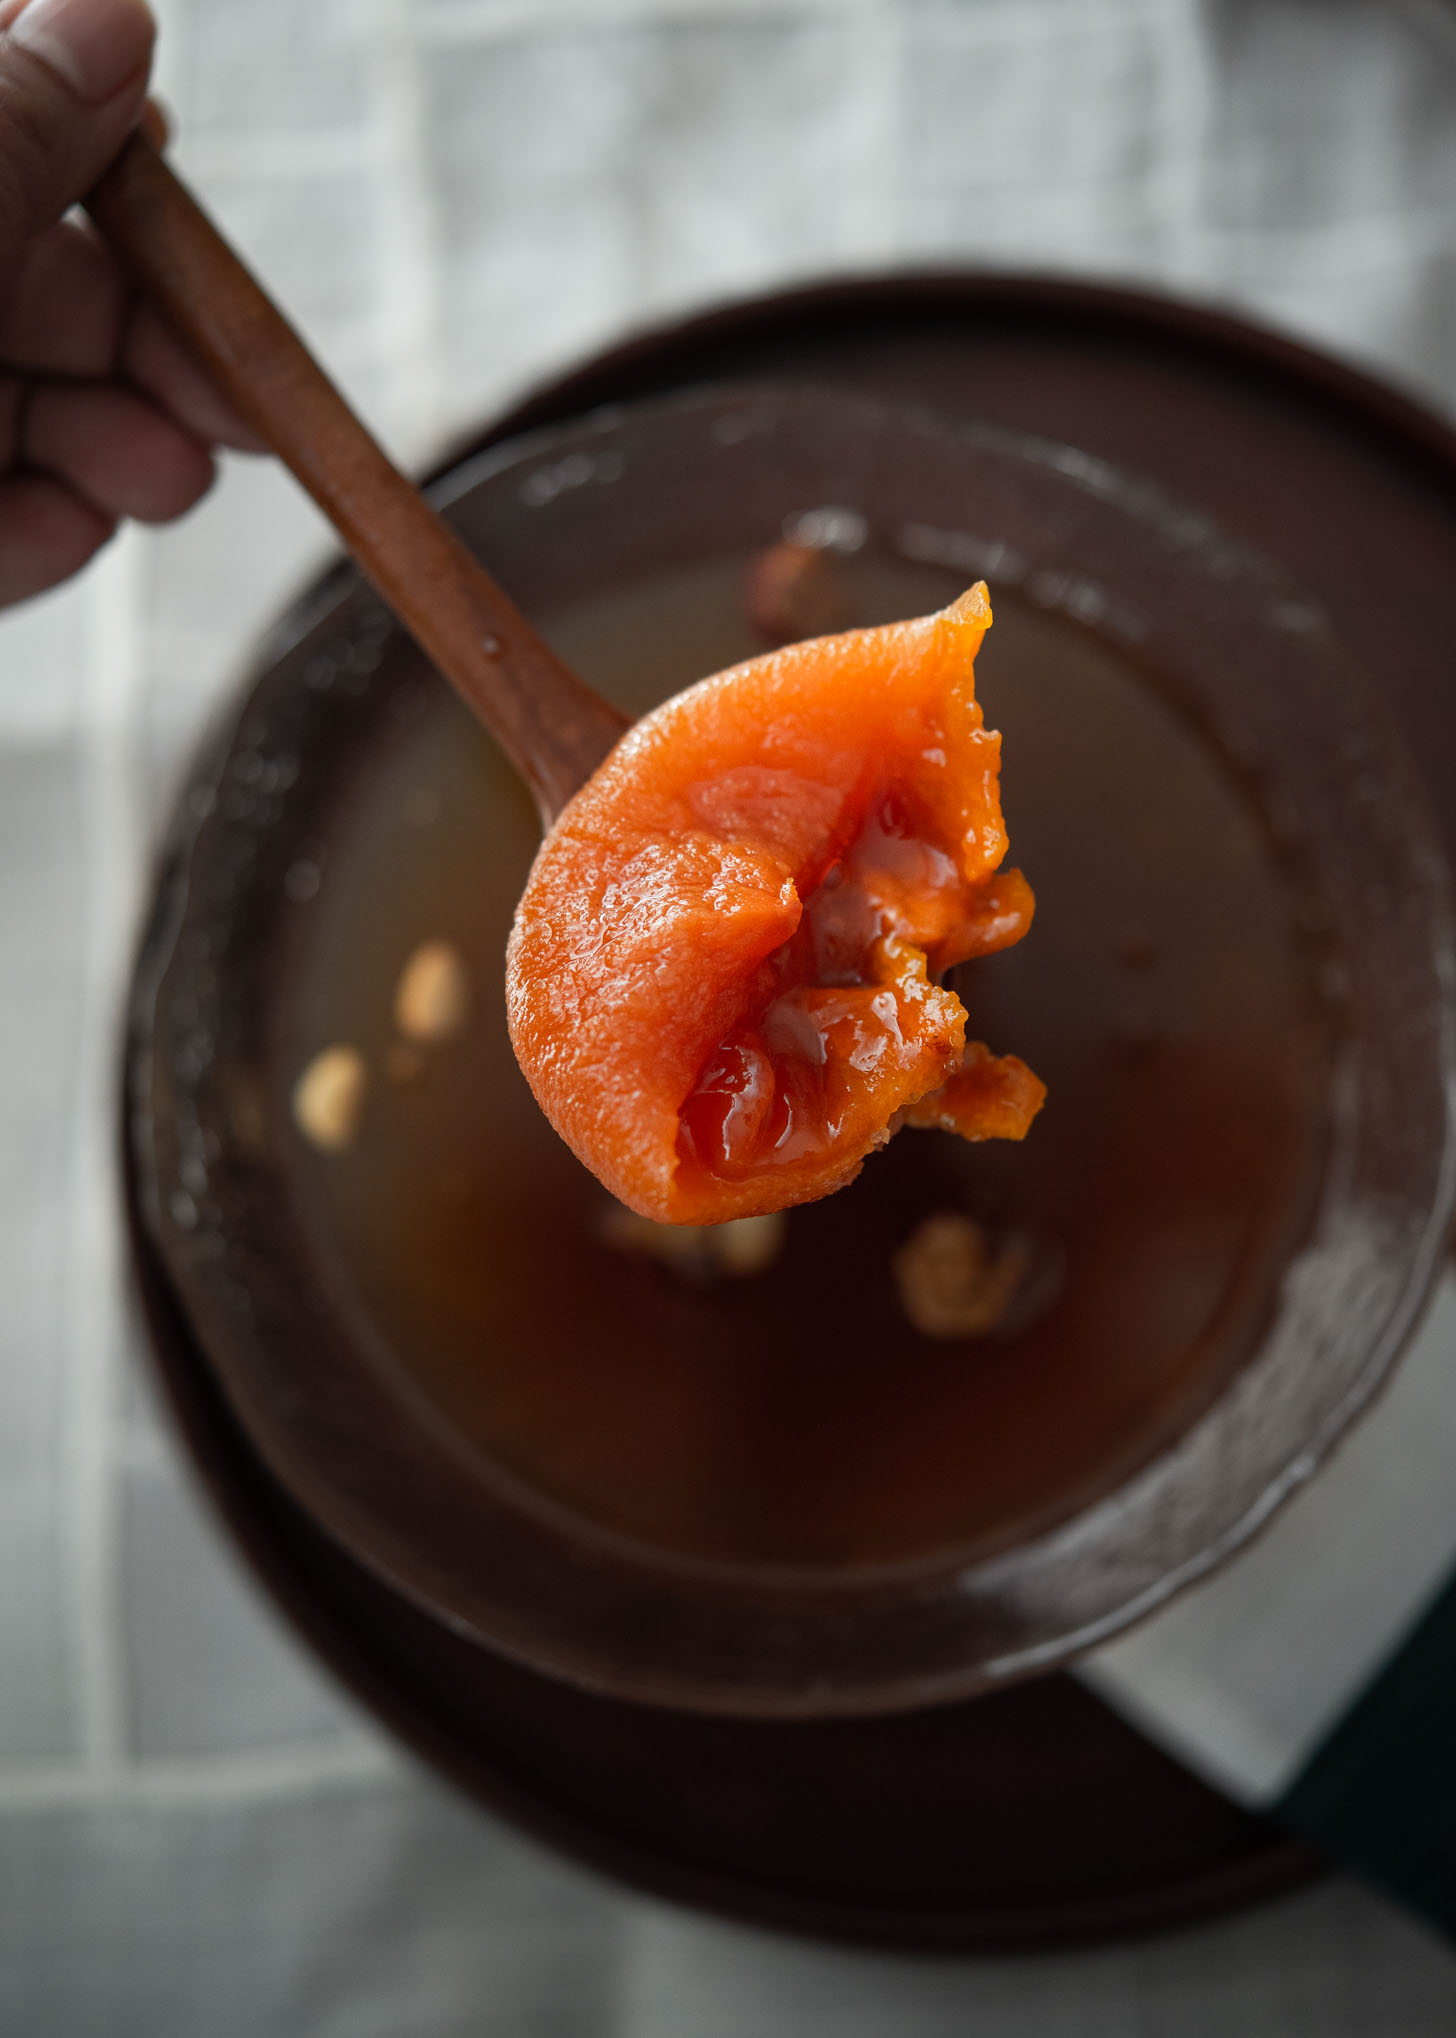 Dried persimmon after soaking is plumped up and soft.